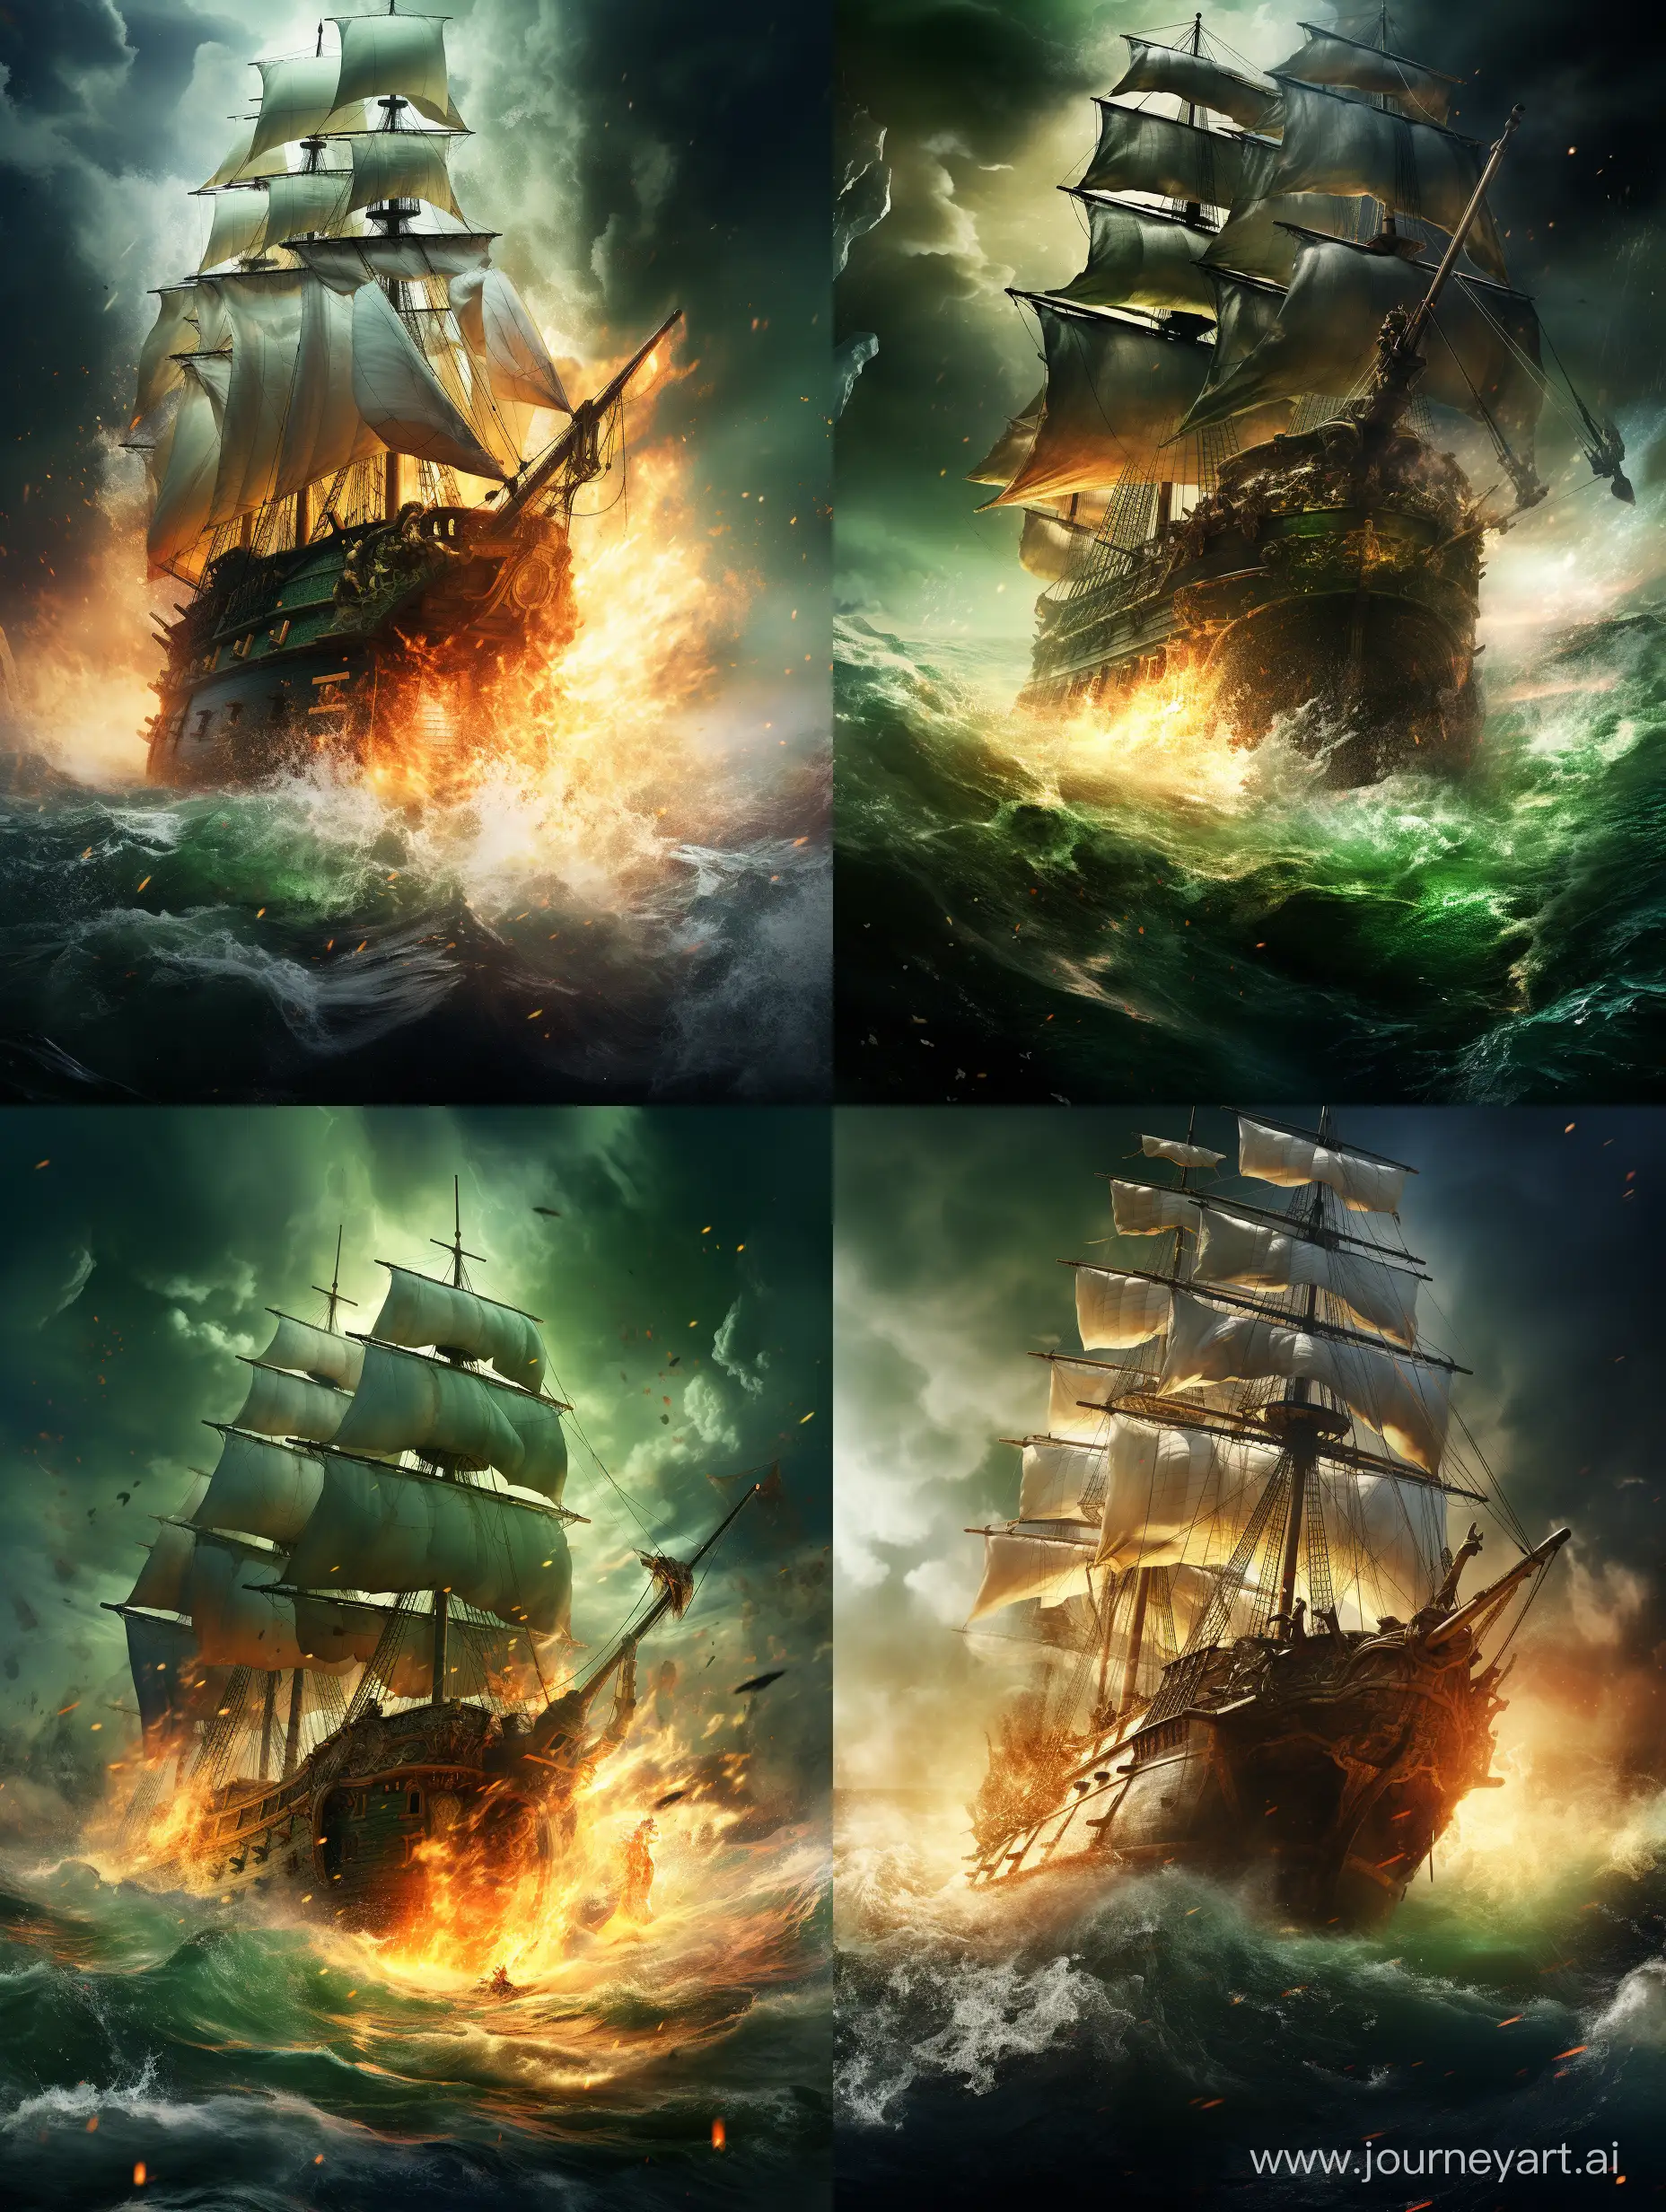 Intense-Naval-Battle-in-the-Stormy-Seas-Ships-Clash-in-HighStakes-Encounter